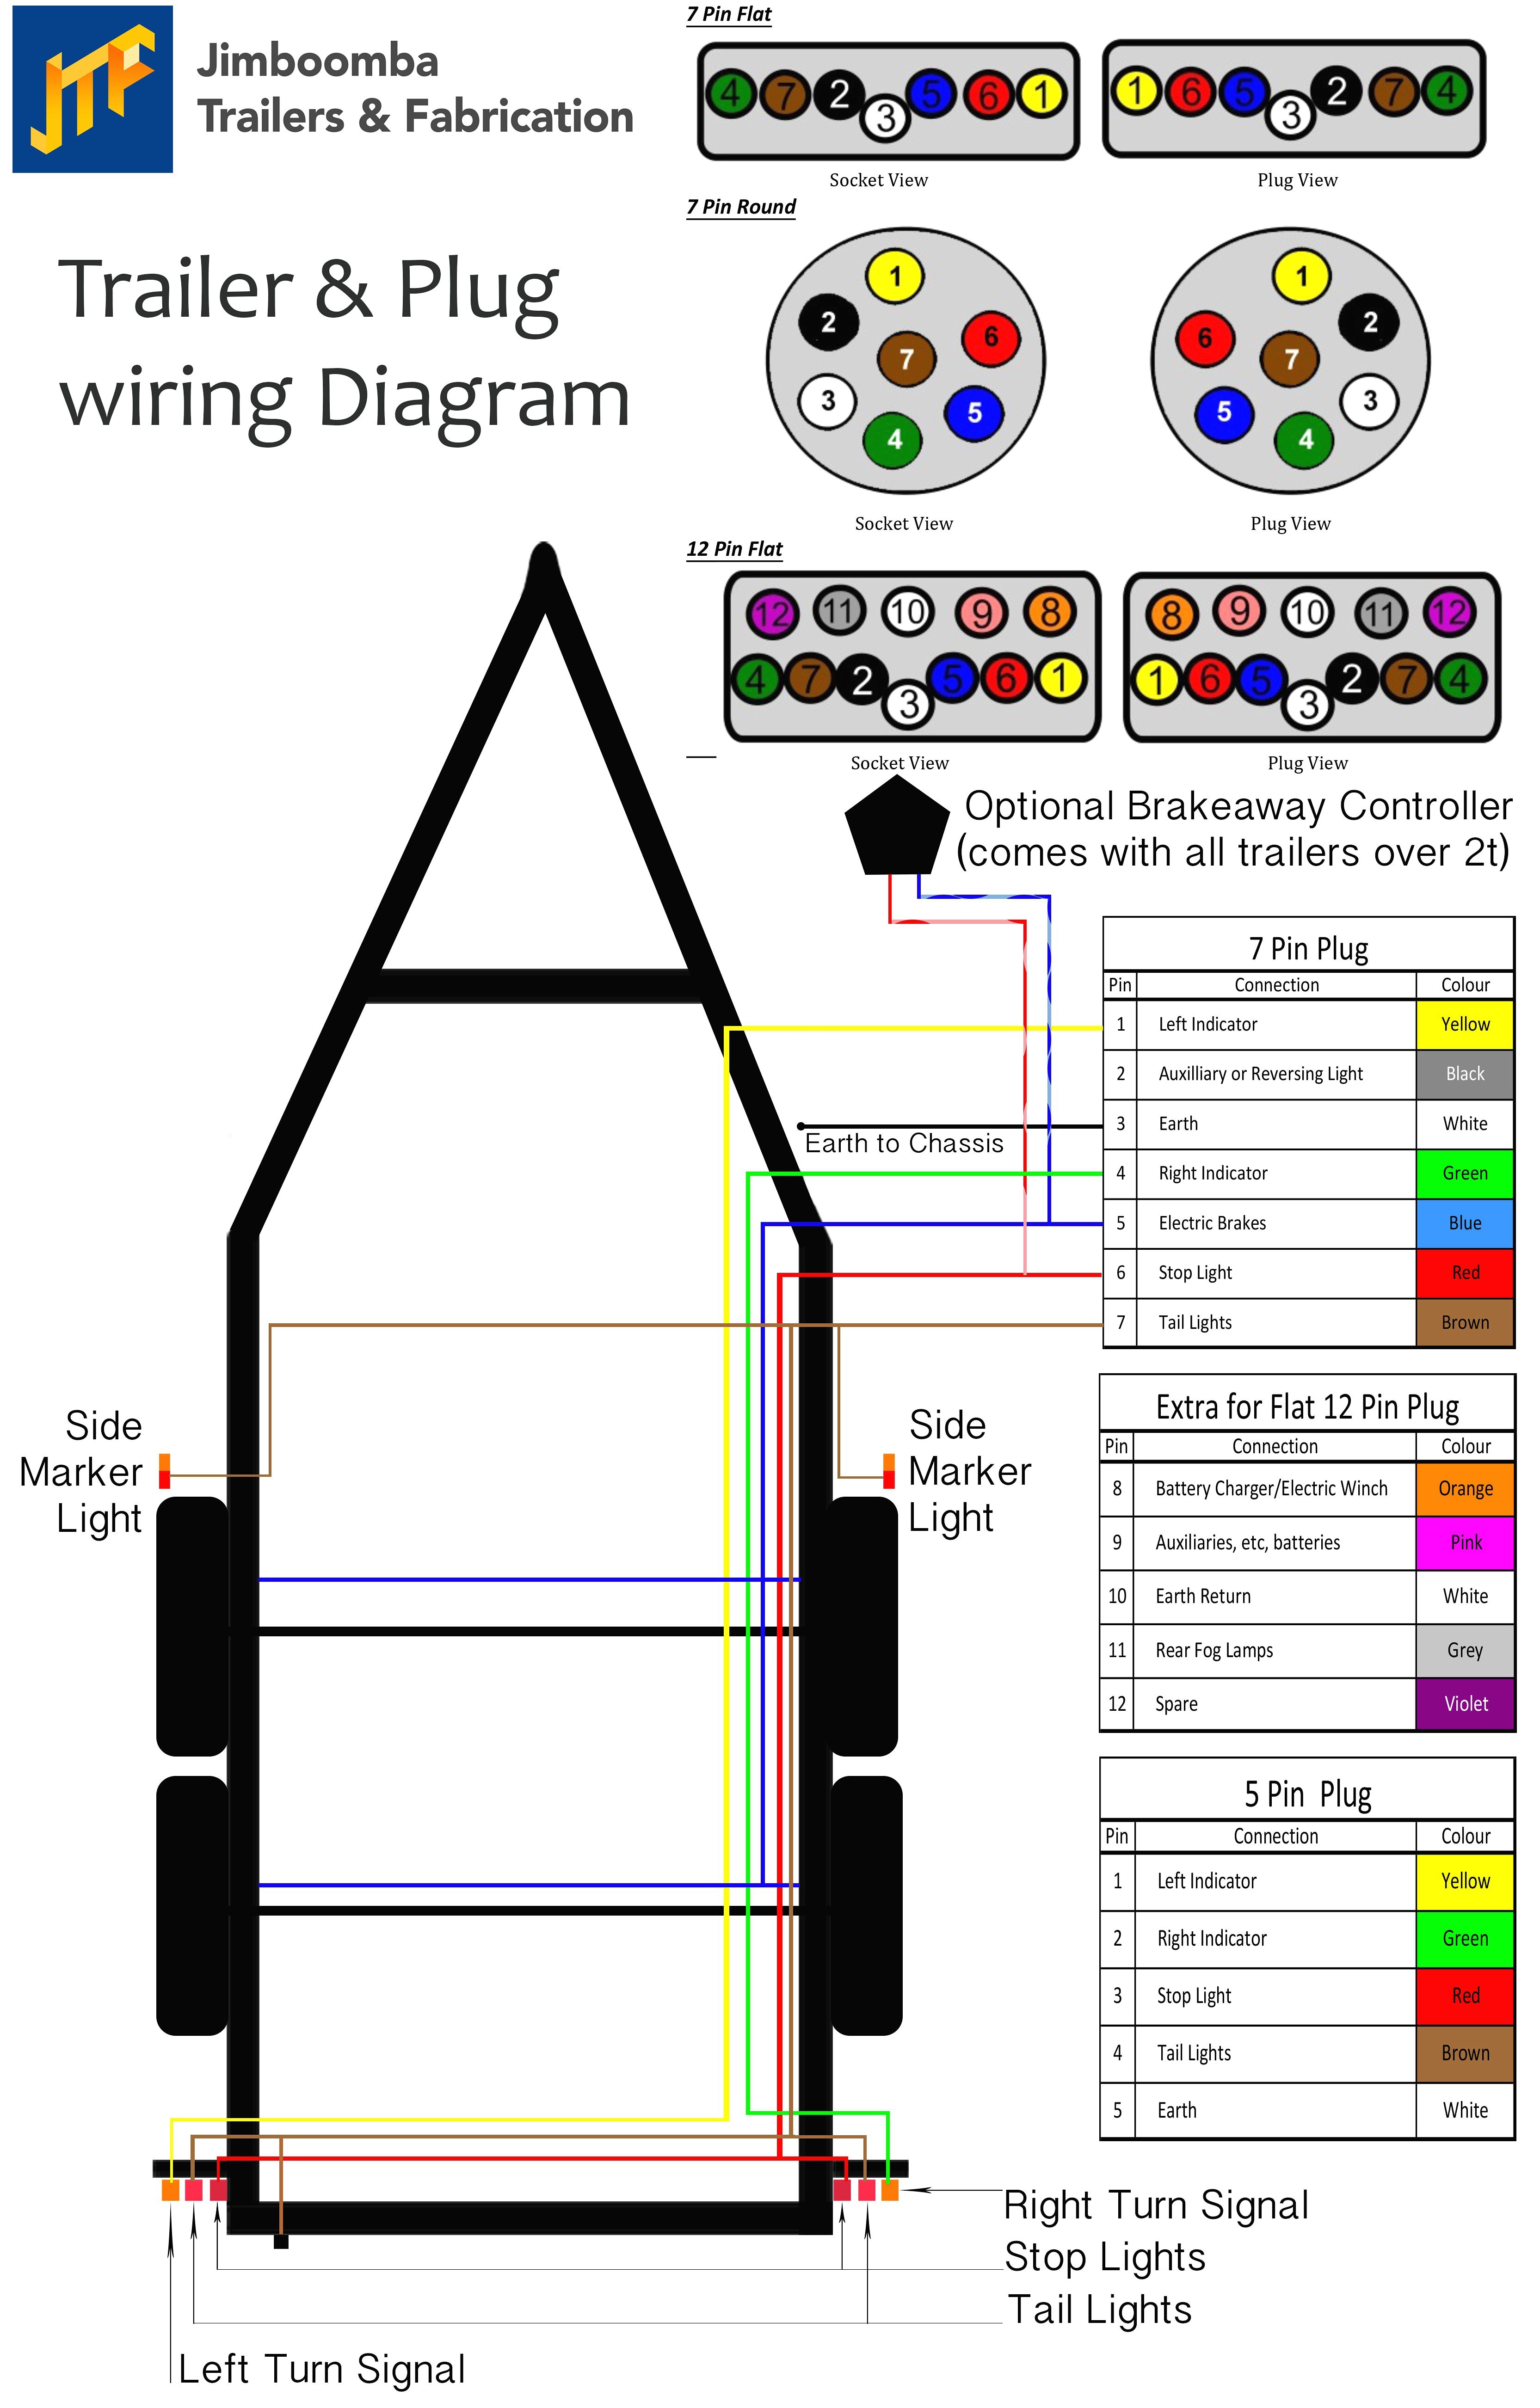 Network Wiring Diagram New Trailer Wiring Diagram 7 Network Cable Colors Ethernet Unusual 6